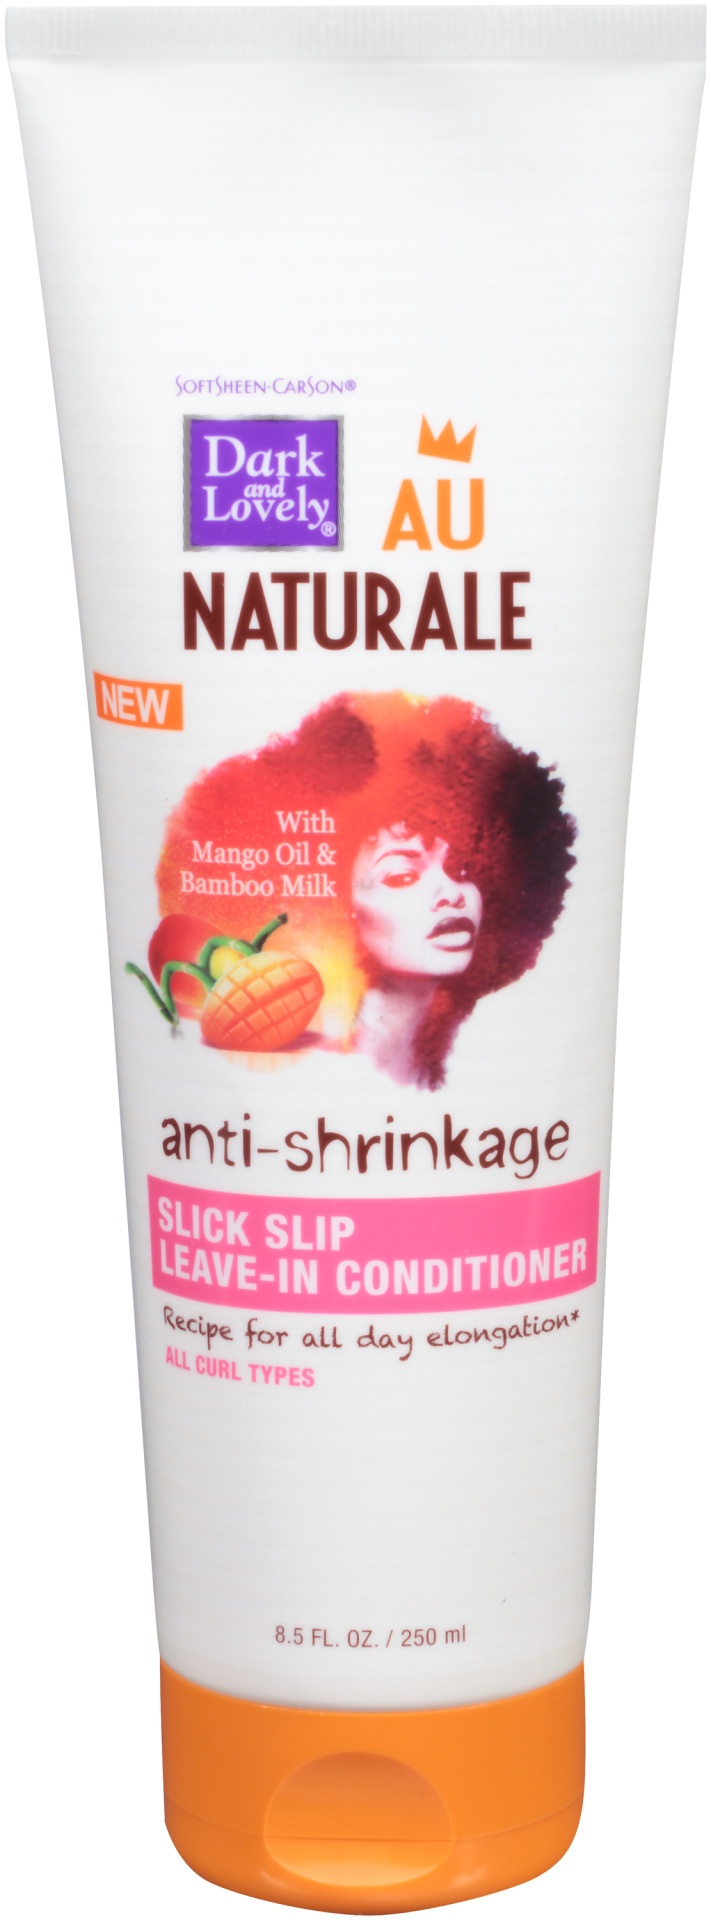 slide 2 of 6, Dark and Lovely Au Naturale Anti-Shrinkage Slick Slip Leave-In Conditioner for All Curl Types, 8.5 fl oz